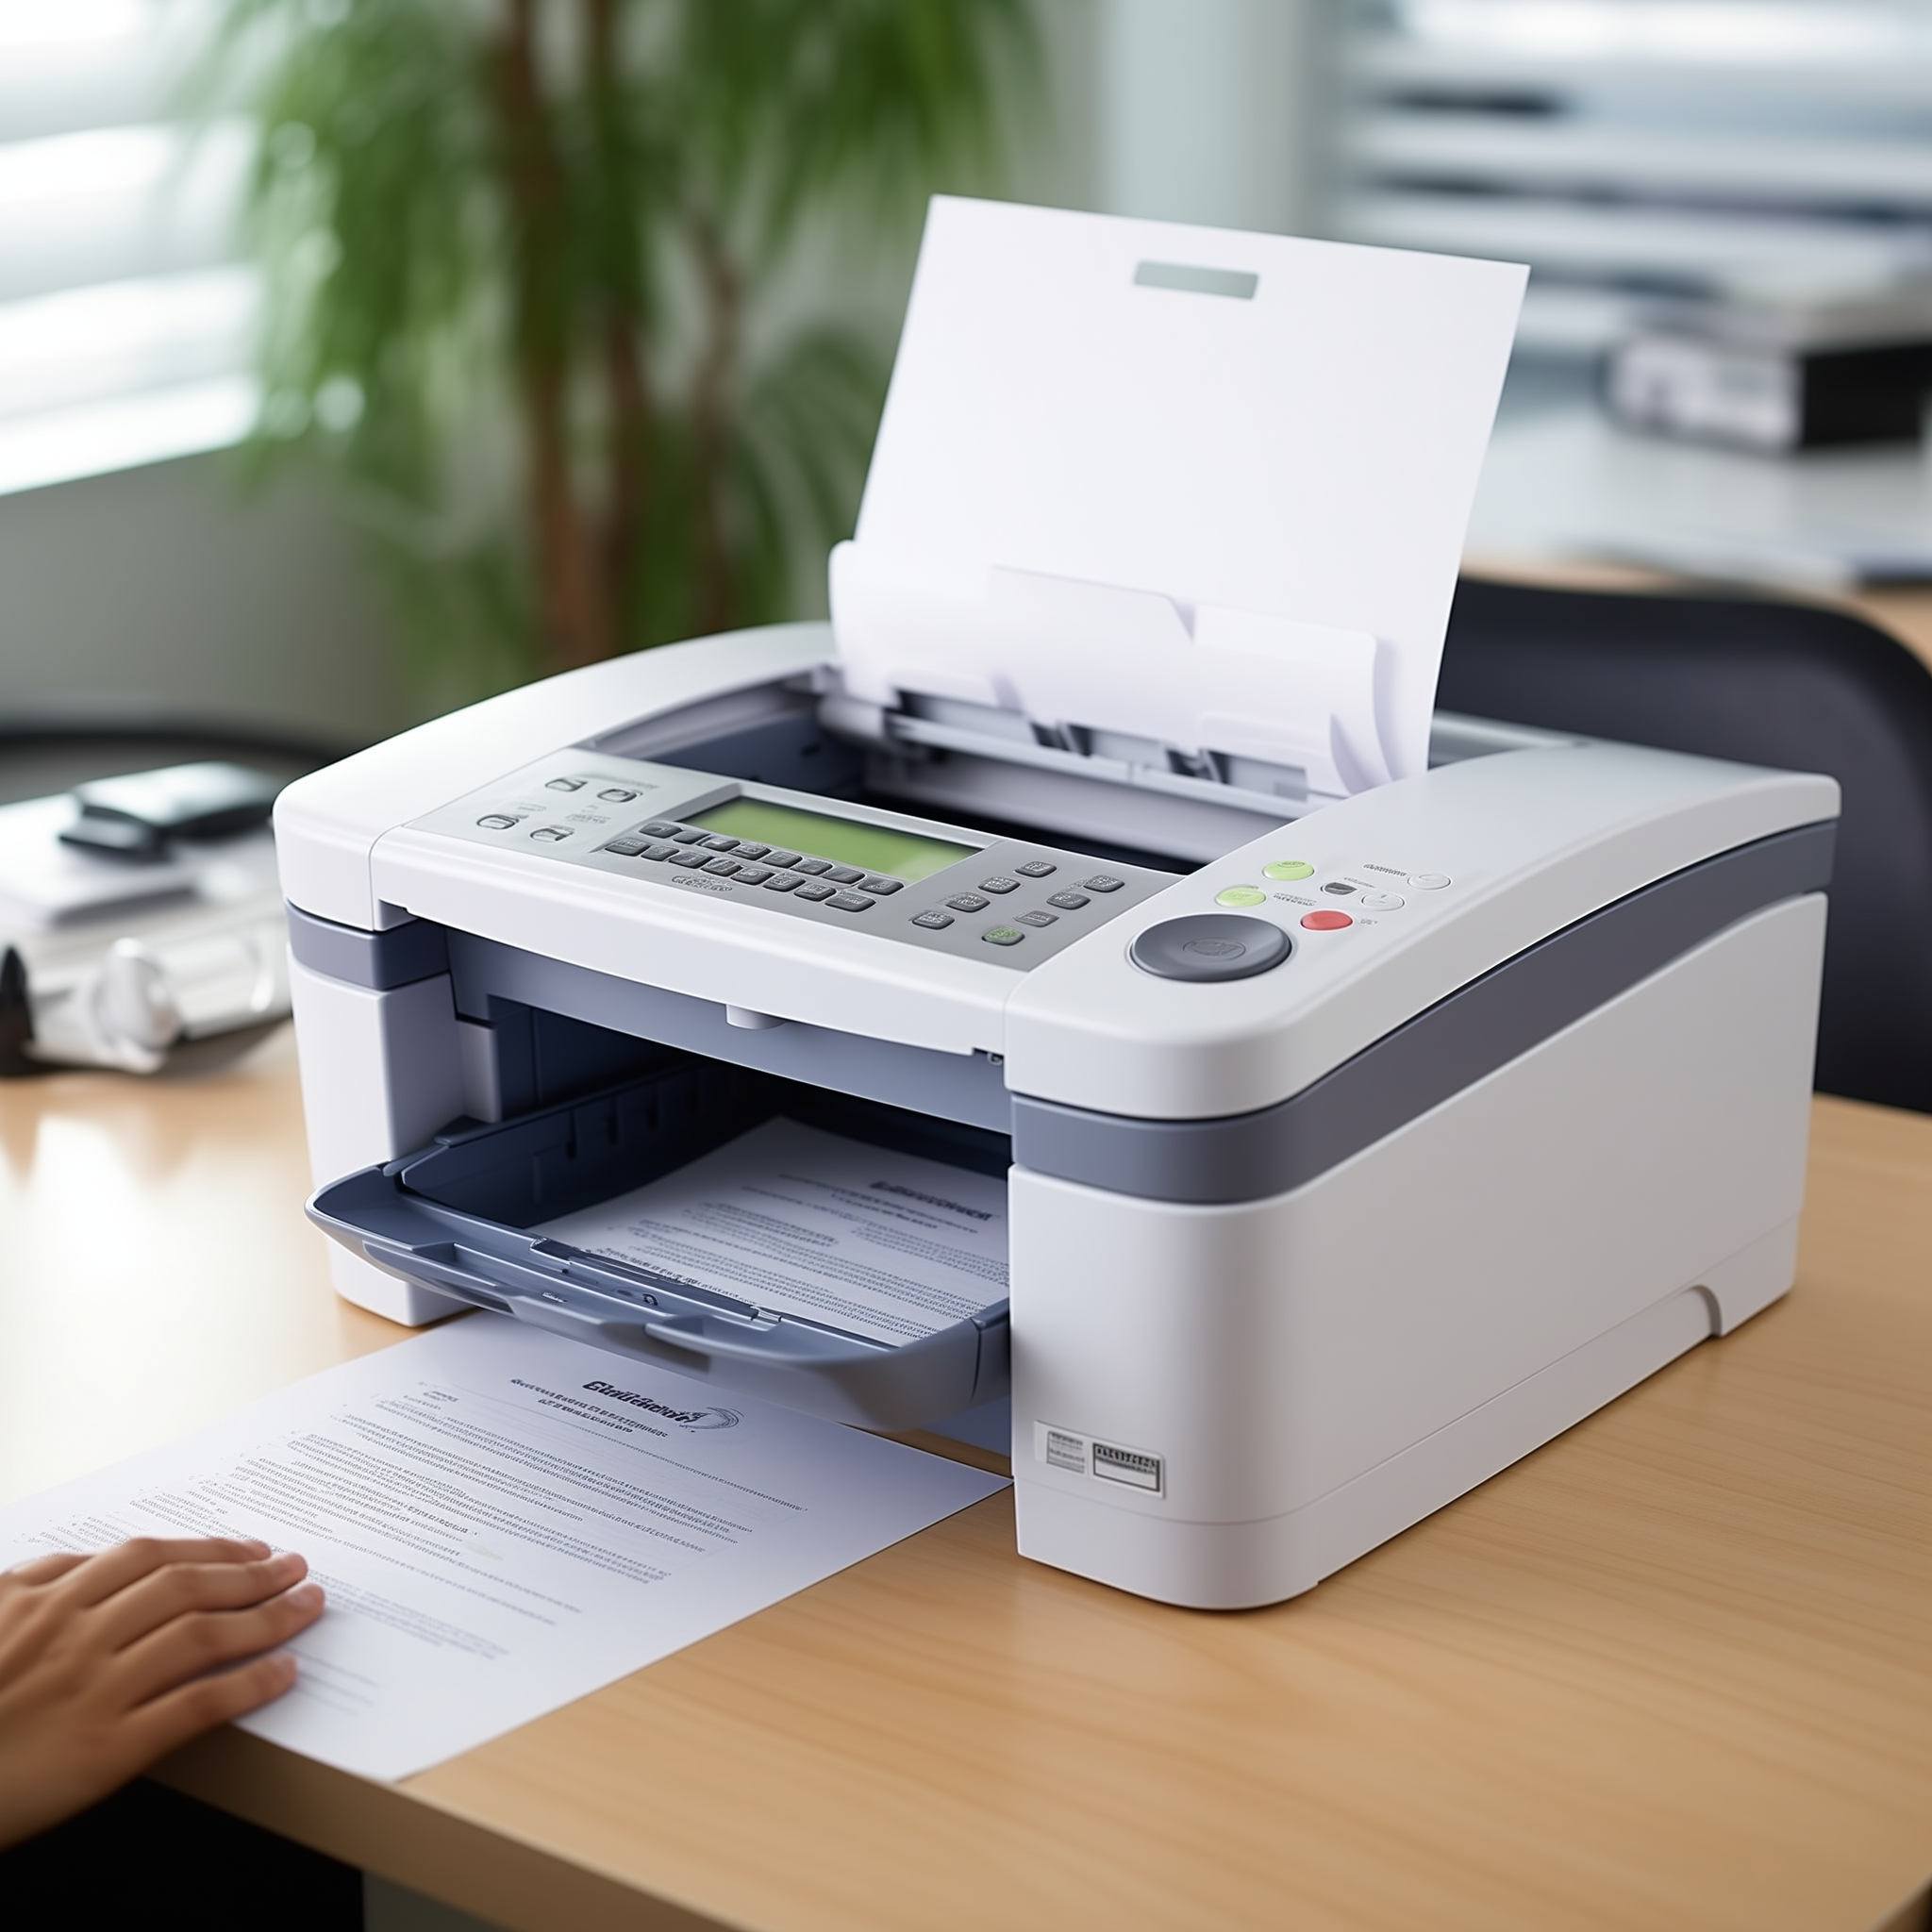 How to Fax a Document?